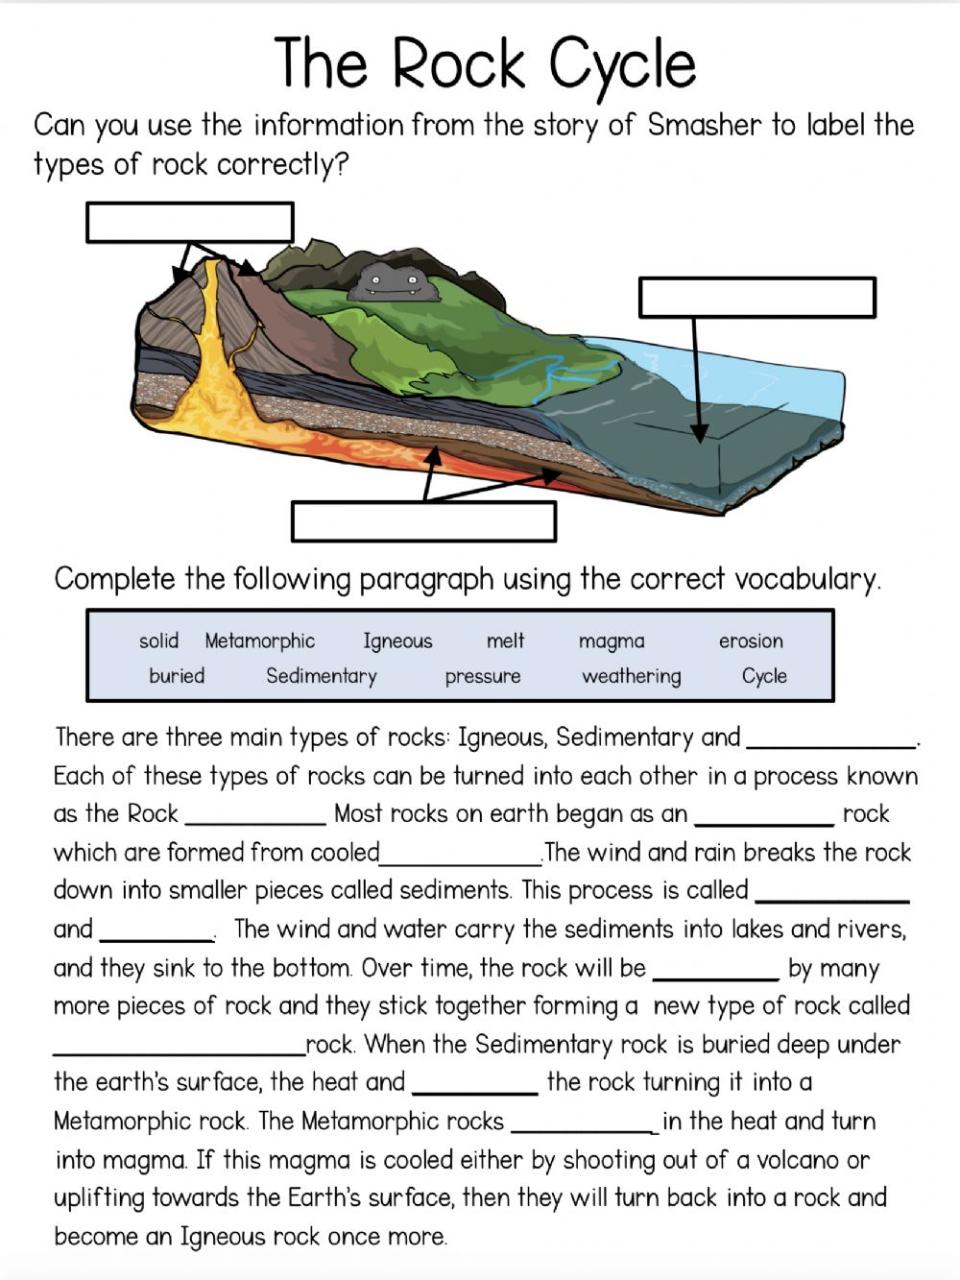 The Rock Cycle Worksheet Answer Key